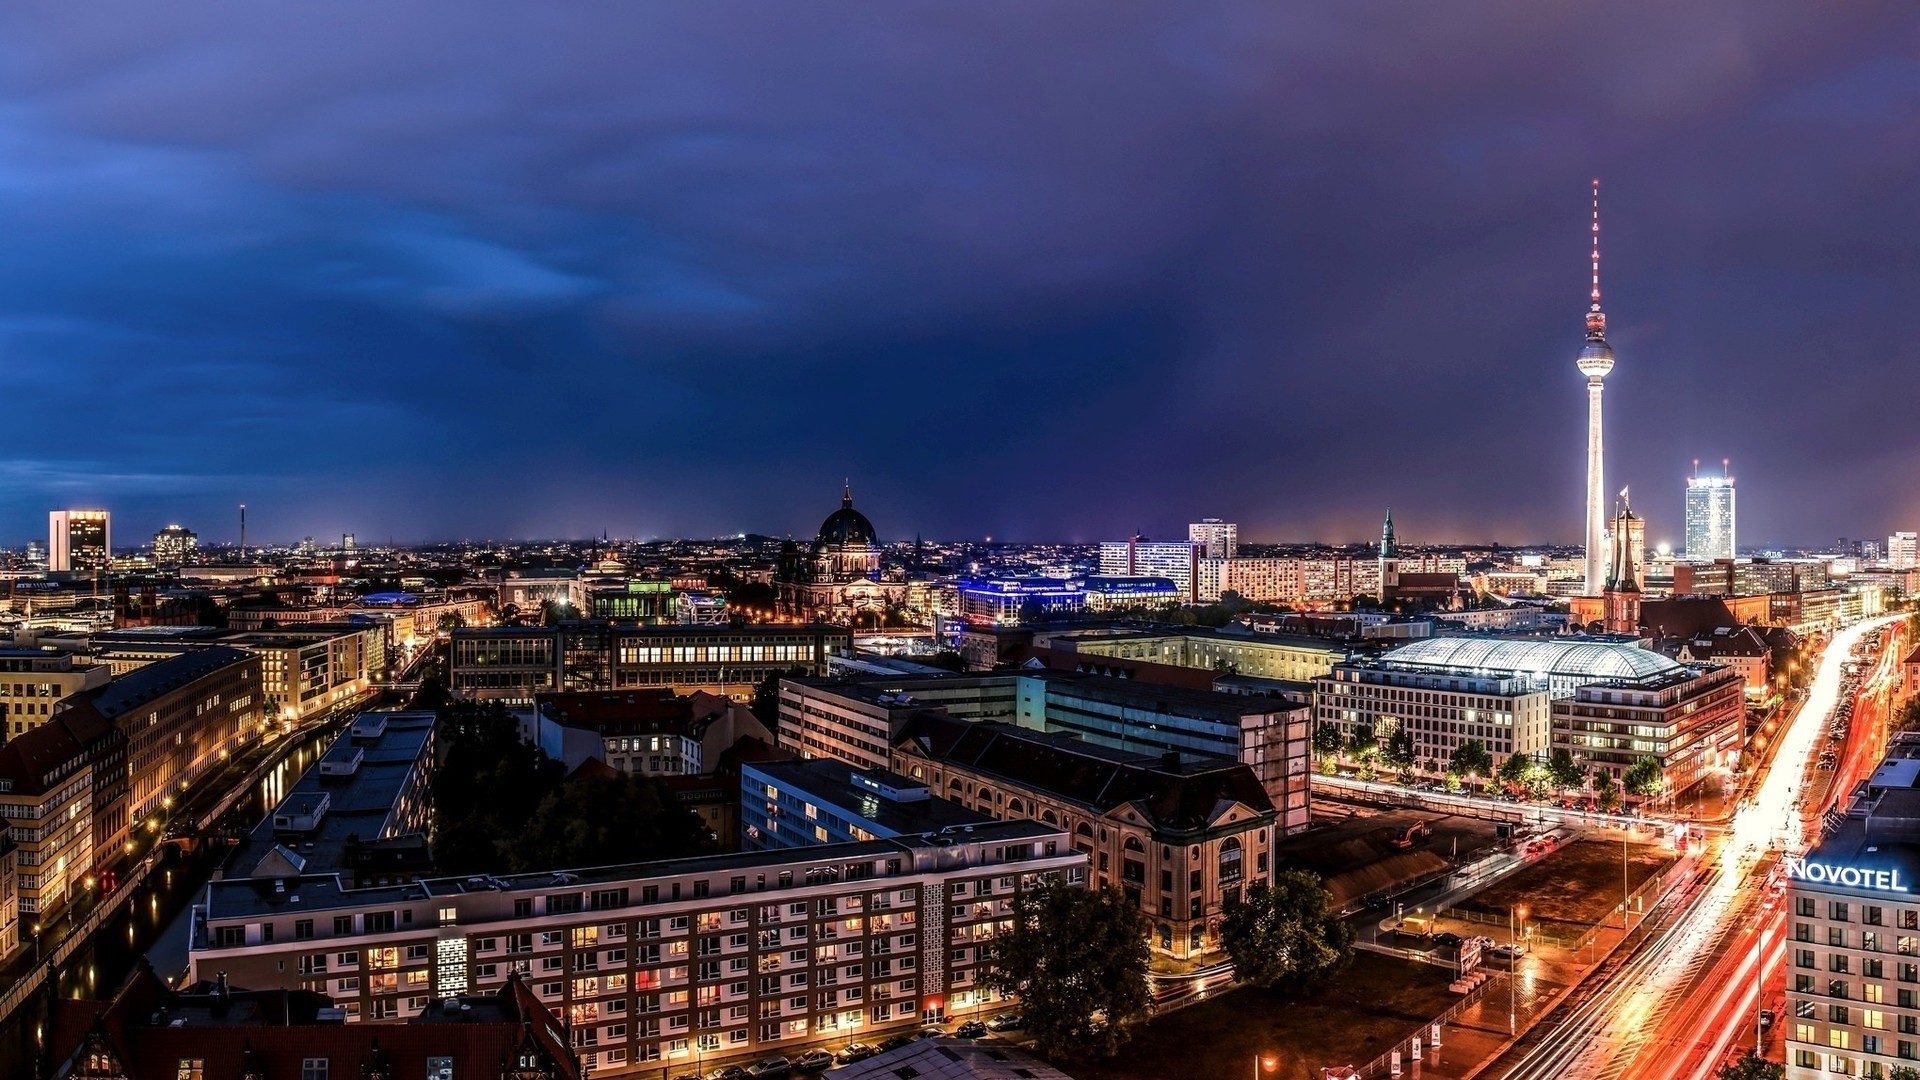 General 1920x1080 architecture building cityscape city capital long exposure Berlin Germany street lights light trails modern tower antenna cathedral clouds night urban trees